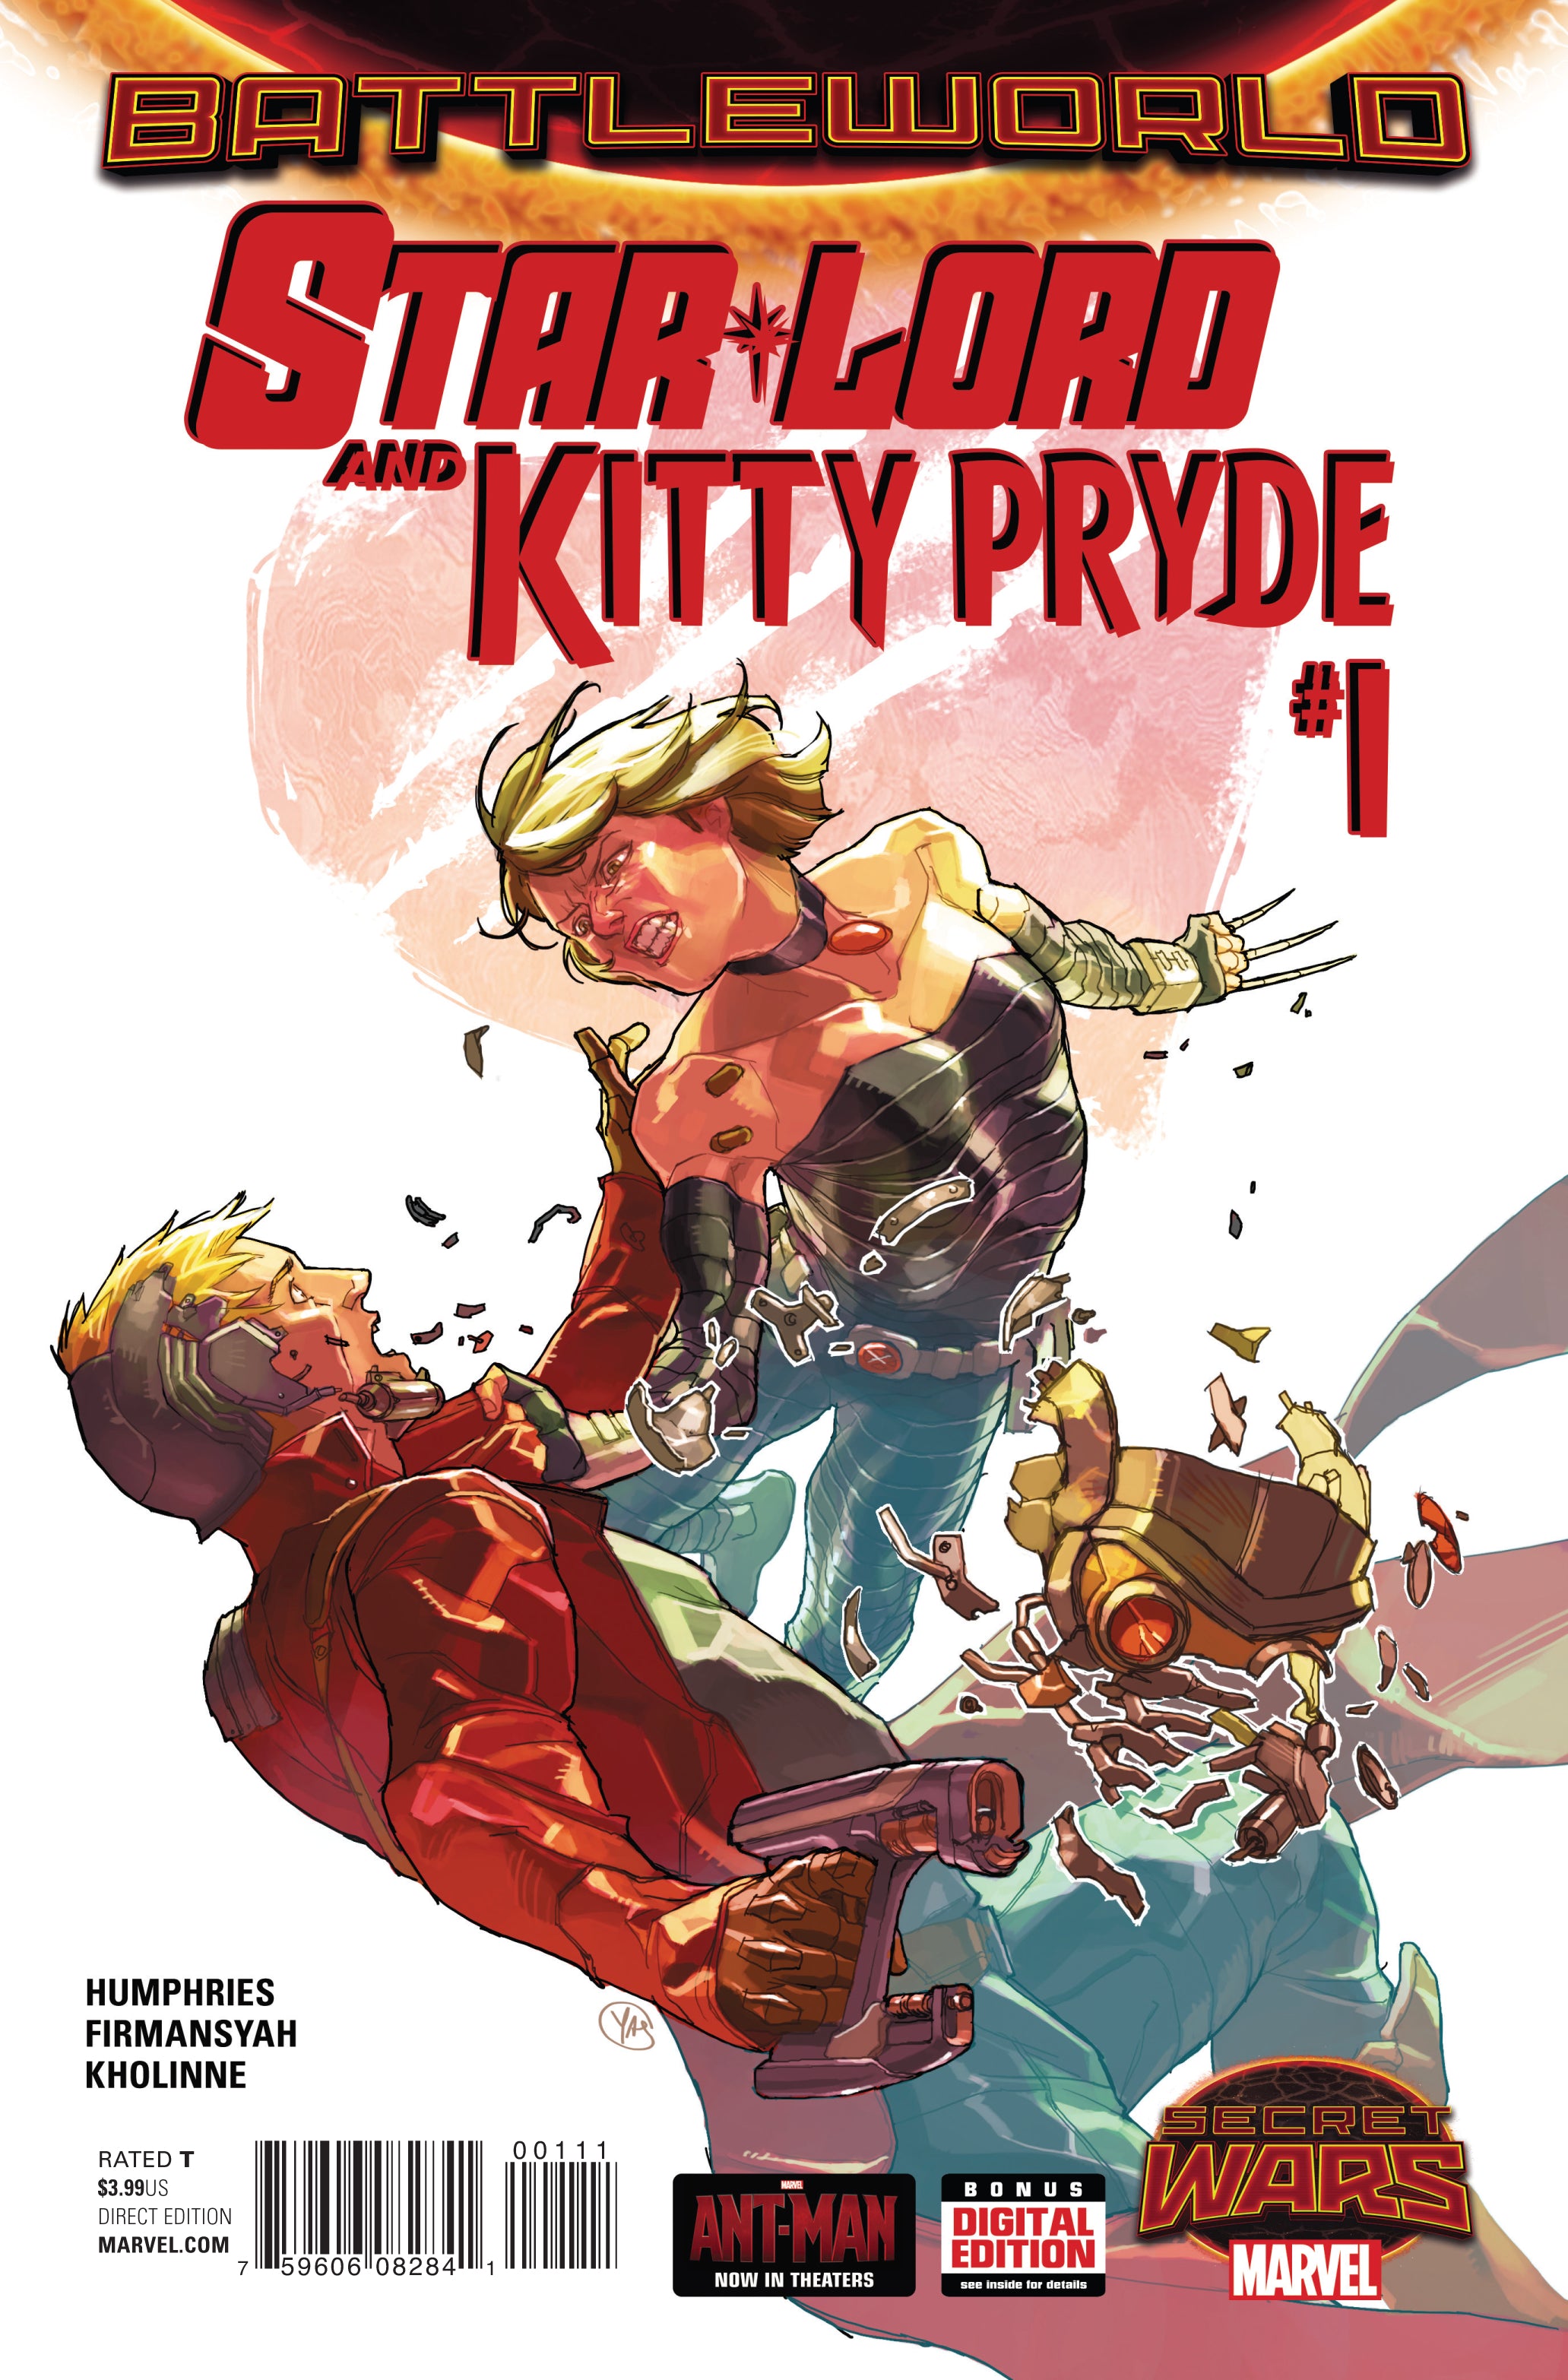 STAR-LORD AND KITTY PRYDE #1 SWA | Game Master's Emporium (The New GME)